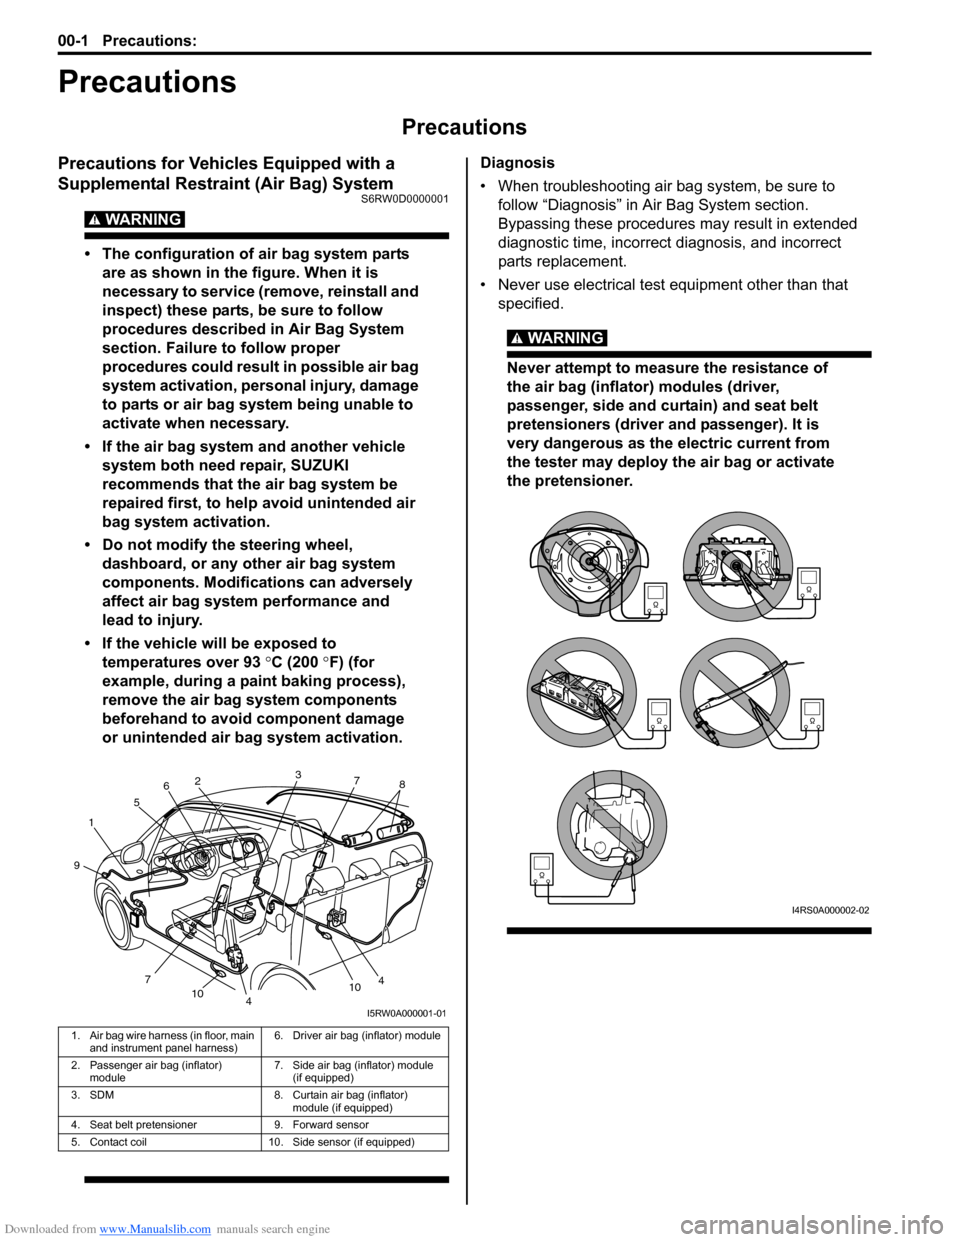 SUZUKI SX4 2006 1.G Service Workshop Manual Downloaded from www.Manualslib.com manuals search engine 00-1 Precautions: 
Precautions
Precautions
Precautions
Precautions for Vehicles Equipped with a 
Supplemental Restraint (Air Bag) System
S6RW0D